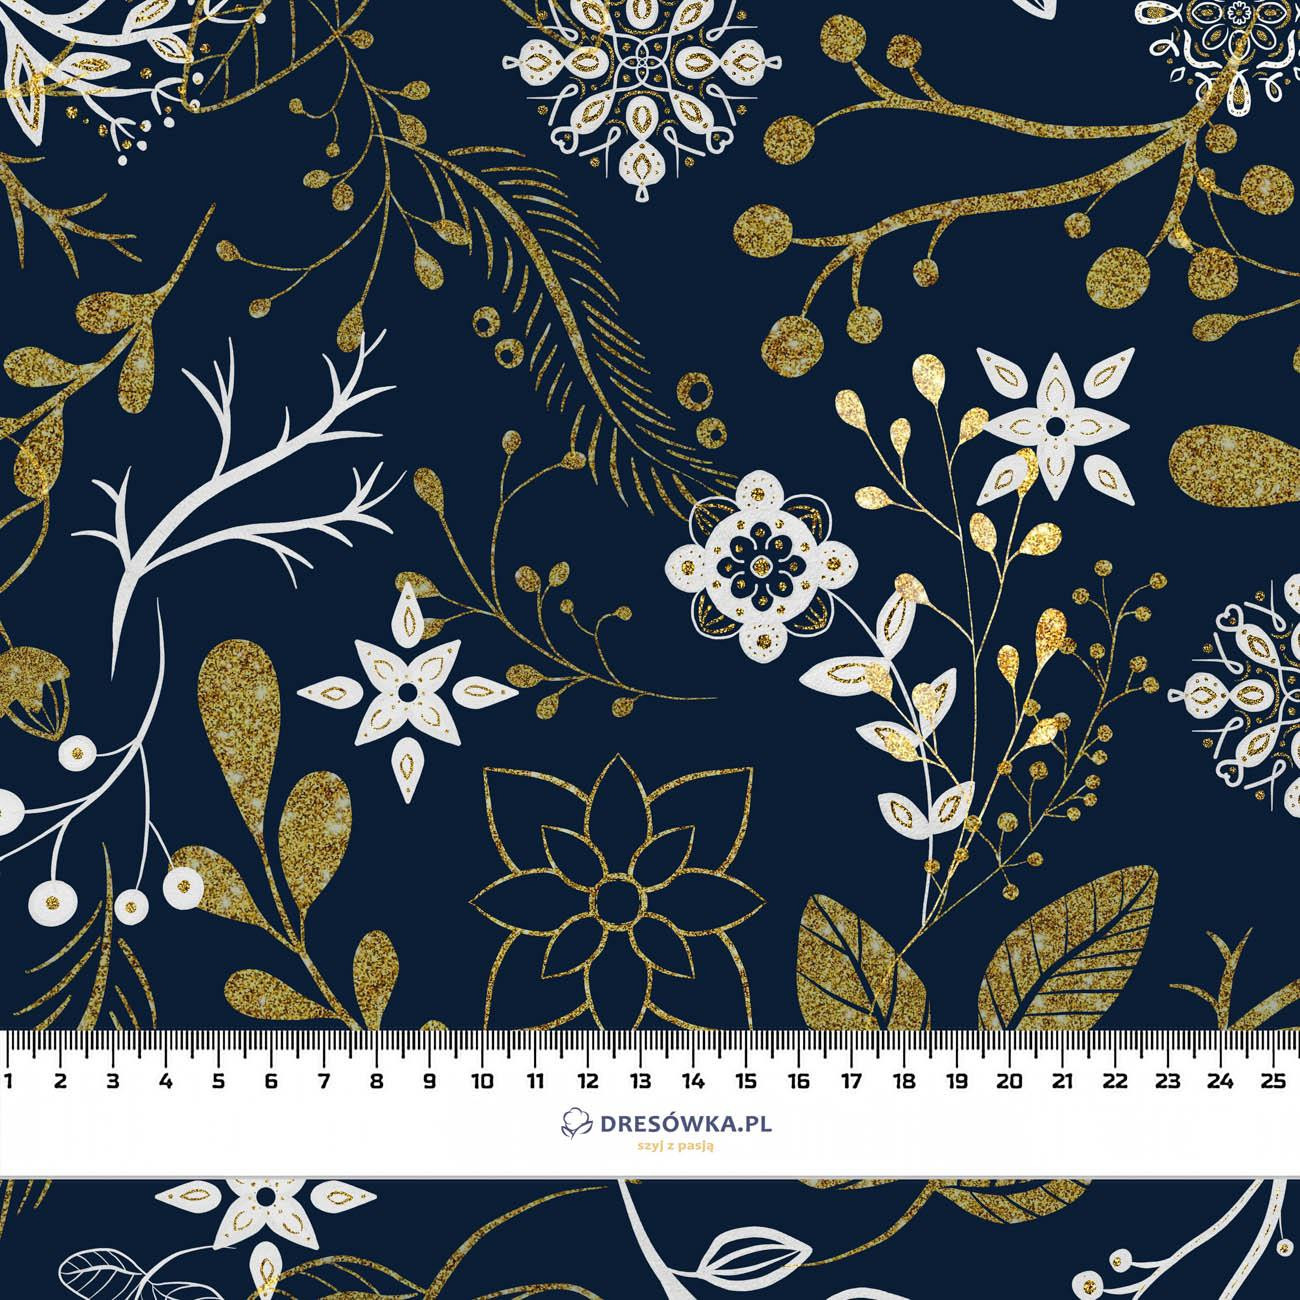 FOLK FLORAL pat. 1 / gold (FOLK FOREST) - Woven Fabric for tablecloths